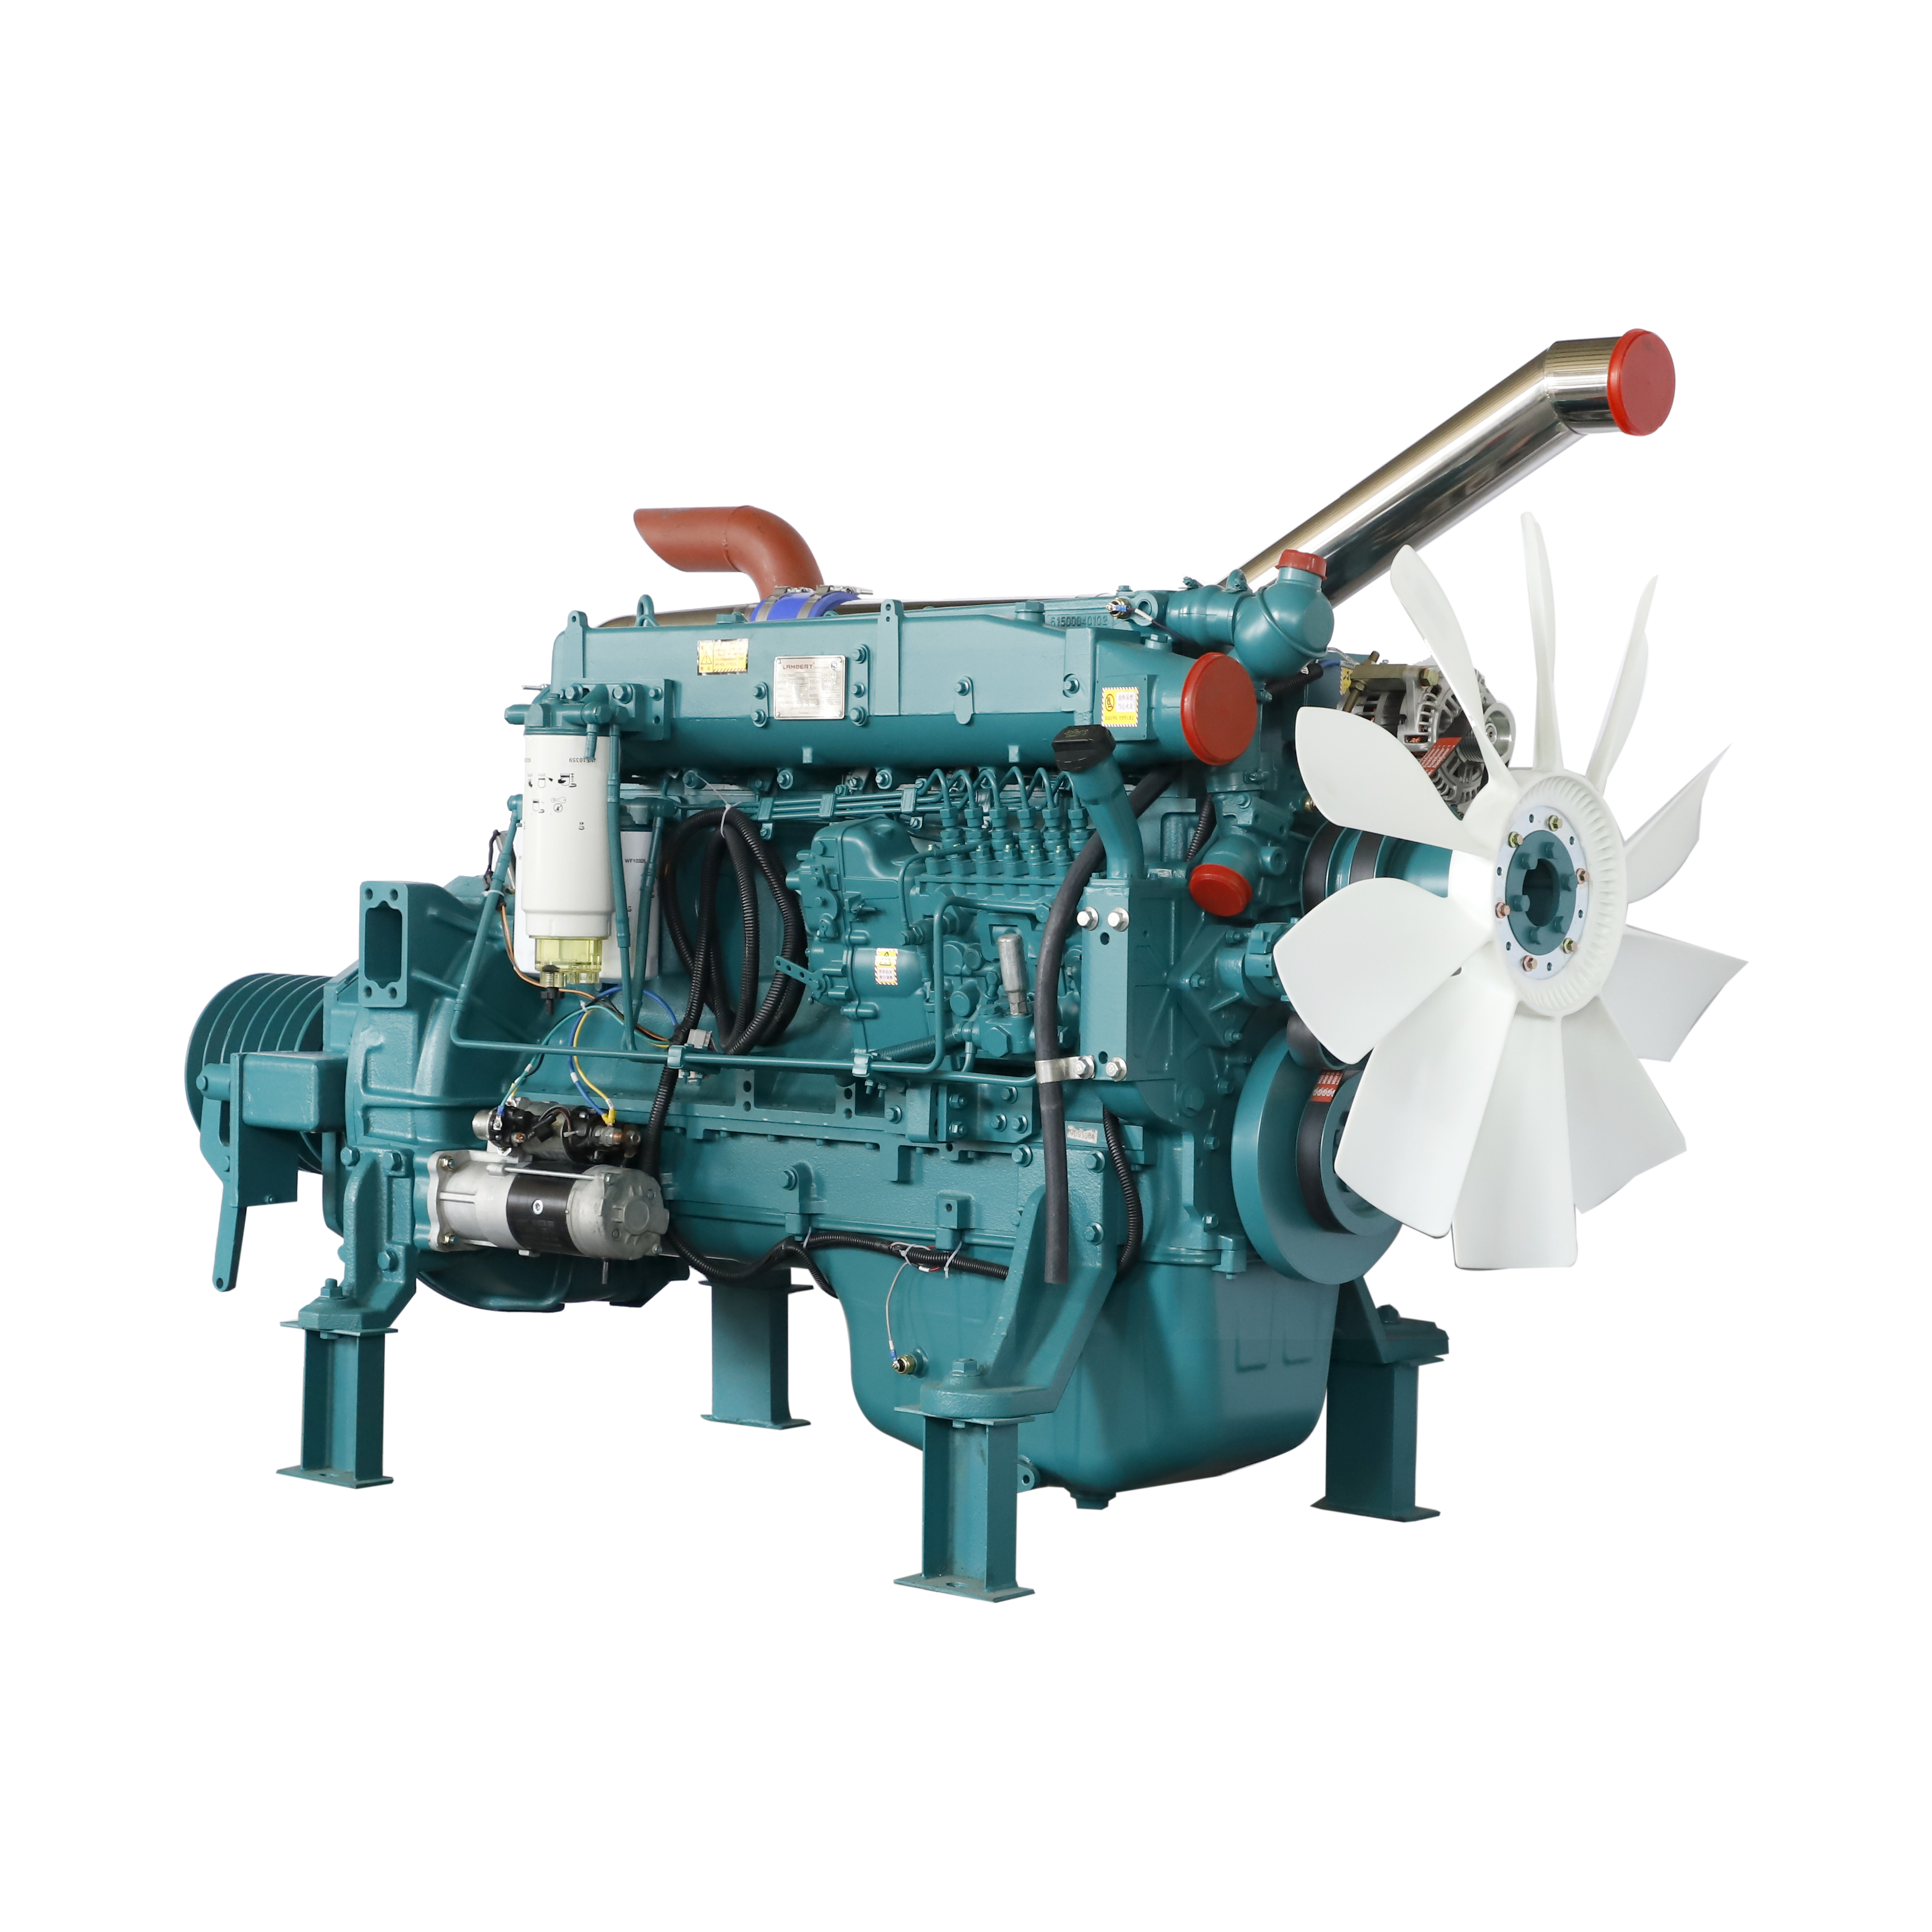 6D10 series diesel engine for fixed power